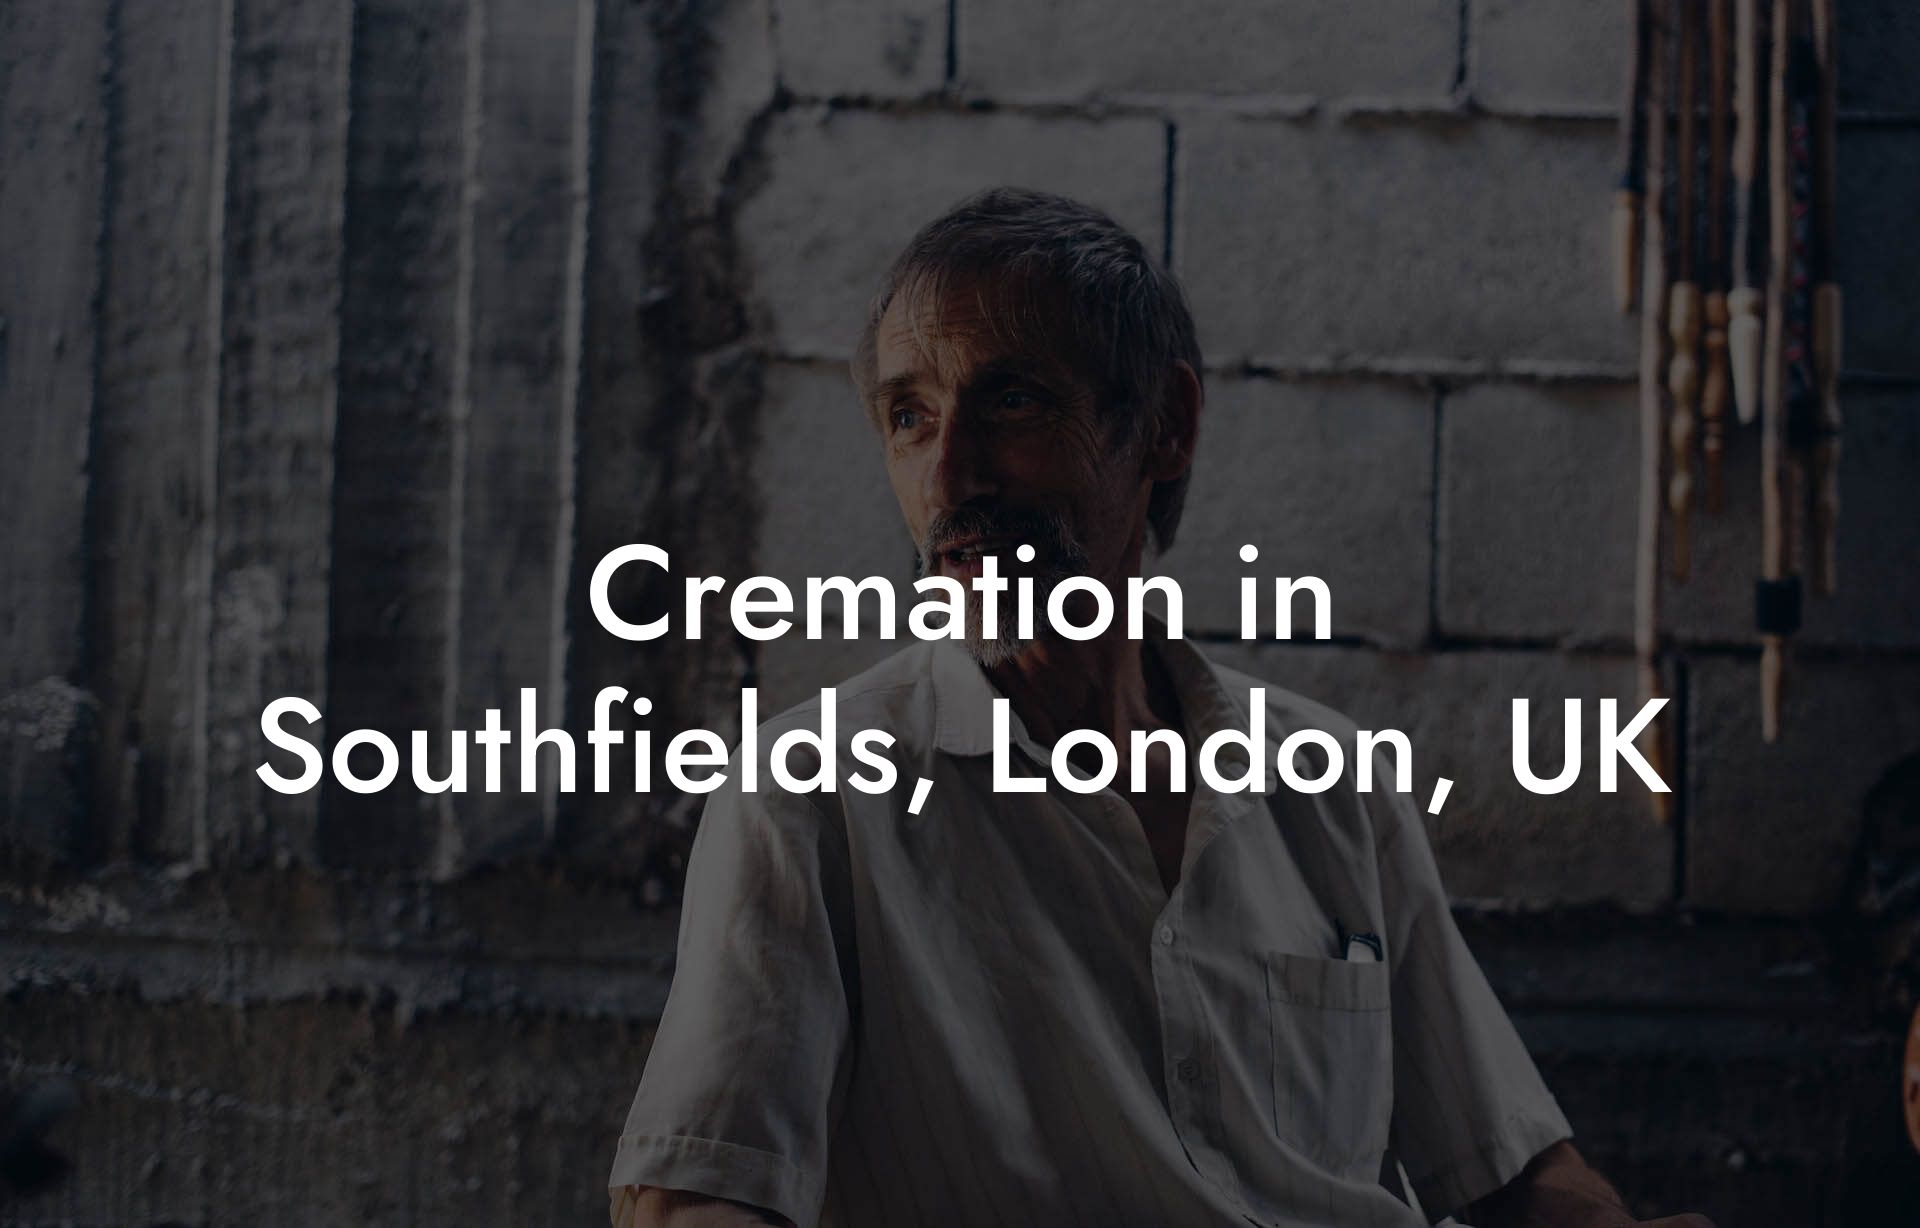 Cremation in Southfields, London, UK